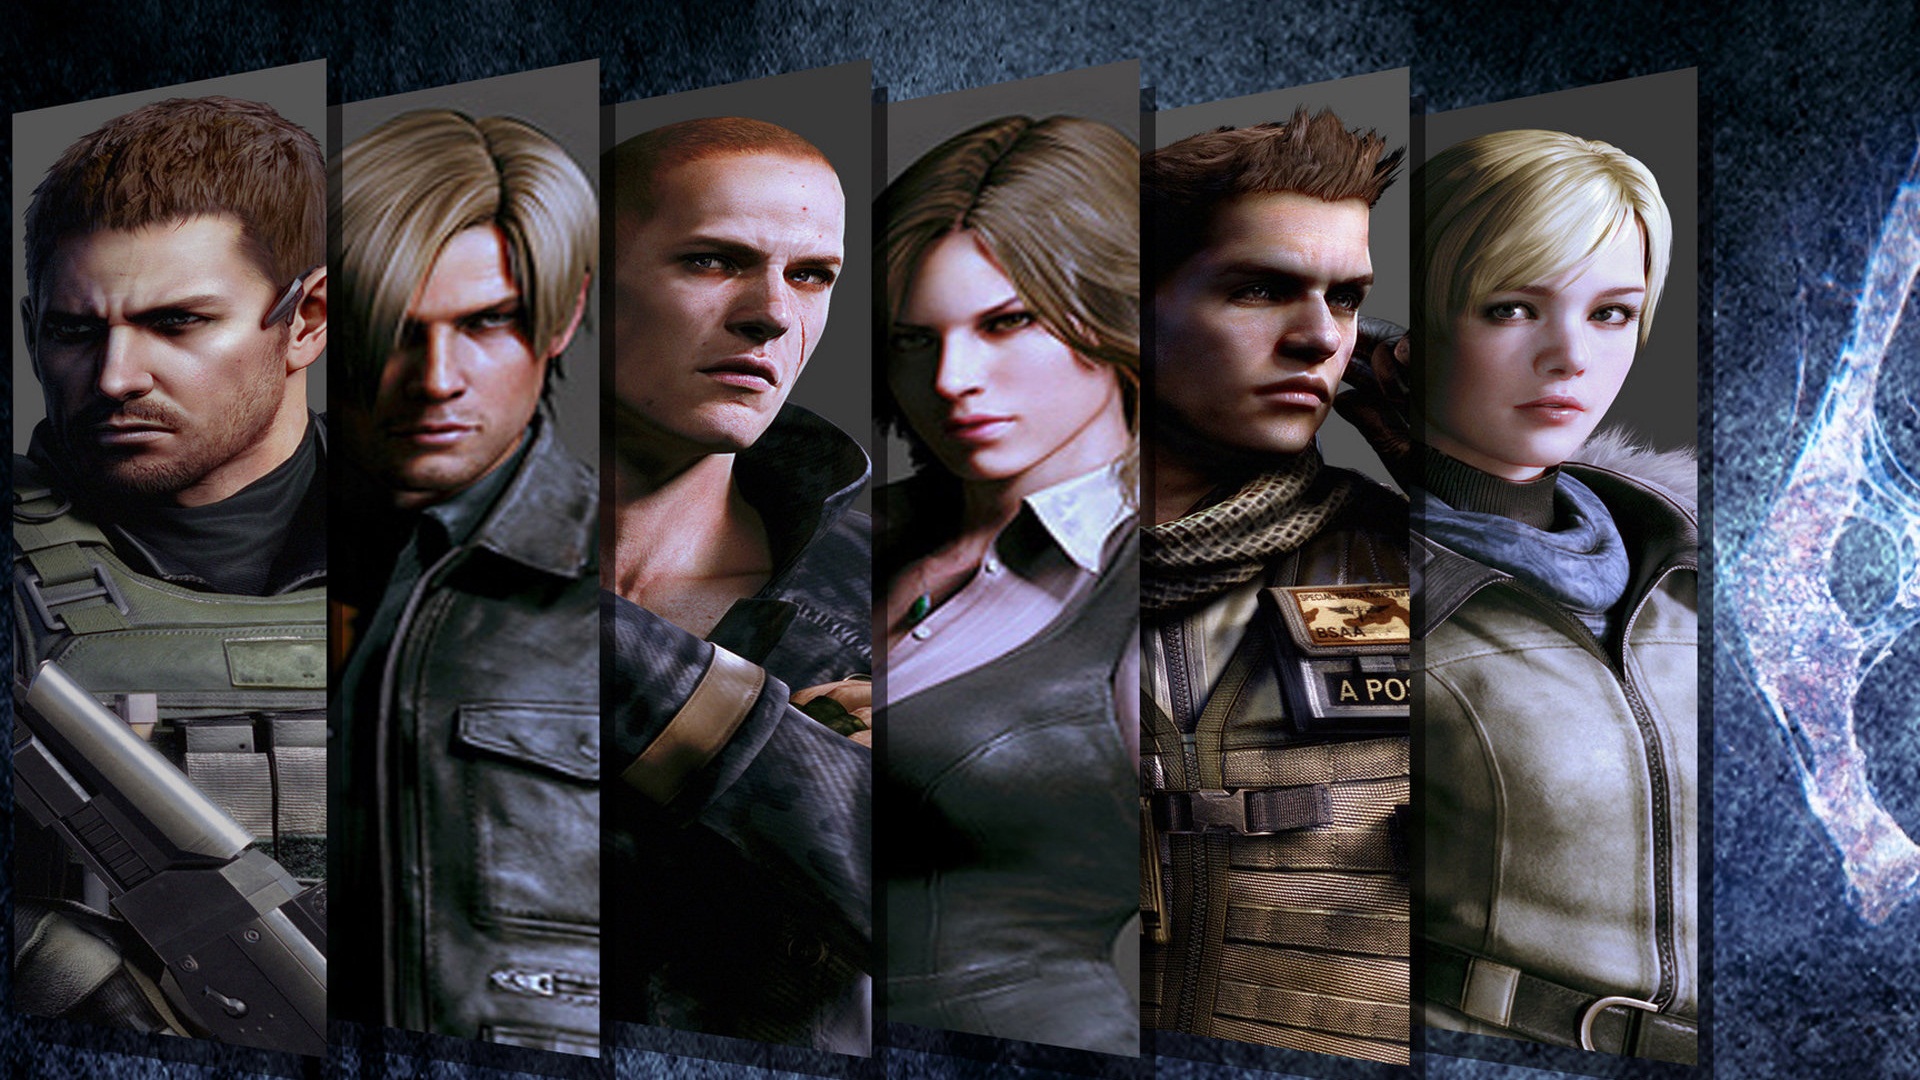 Resident Evil 6 HD game wallpapers #2 - 1920x1080